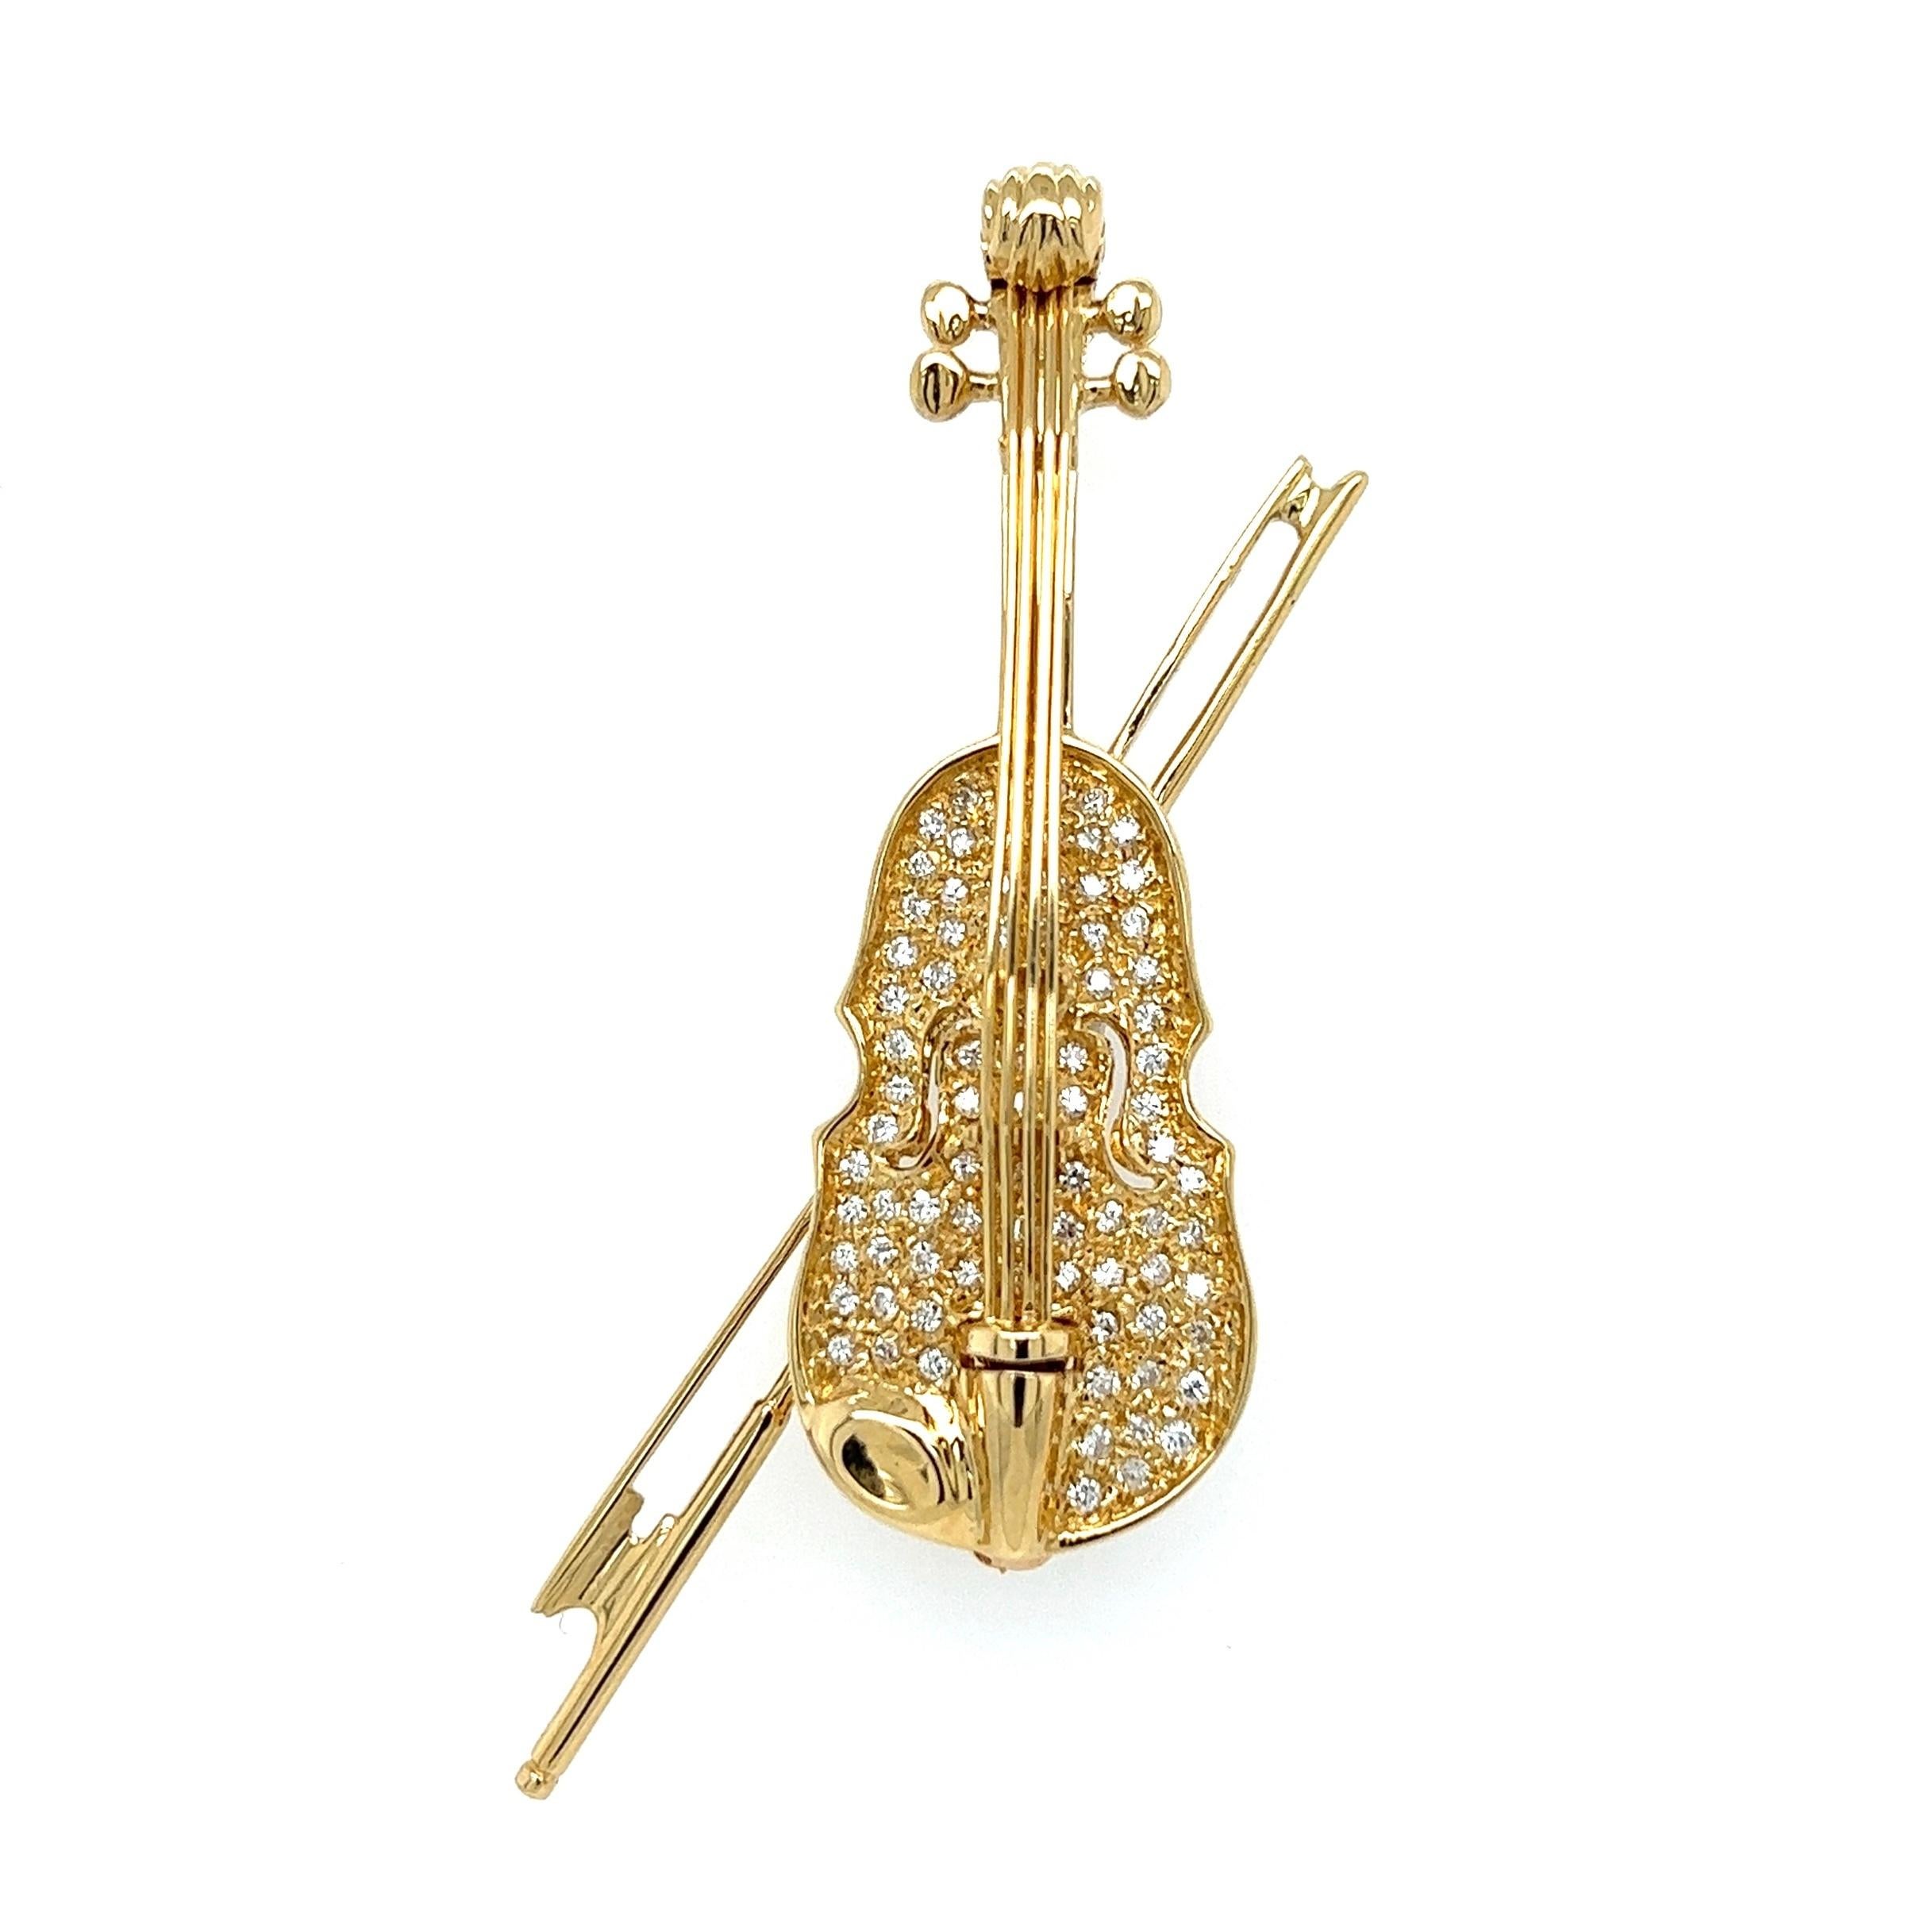 Simply Beautiful! Diamond Violin and Bow Gold Brooch Pin. Hand set with Pave Diamonds, approx. 0.55tcw. Hand crafted in 18K Yellow Gold. Measuring approx. 2.25” H x 1.00” W. More Beautiful in real time! Chic and Timeless…Sure to be admired, a piece